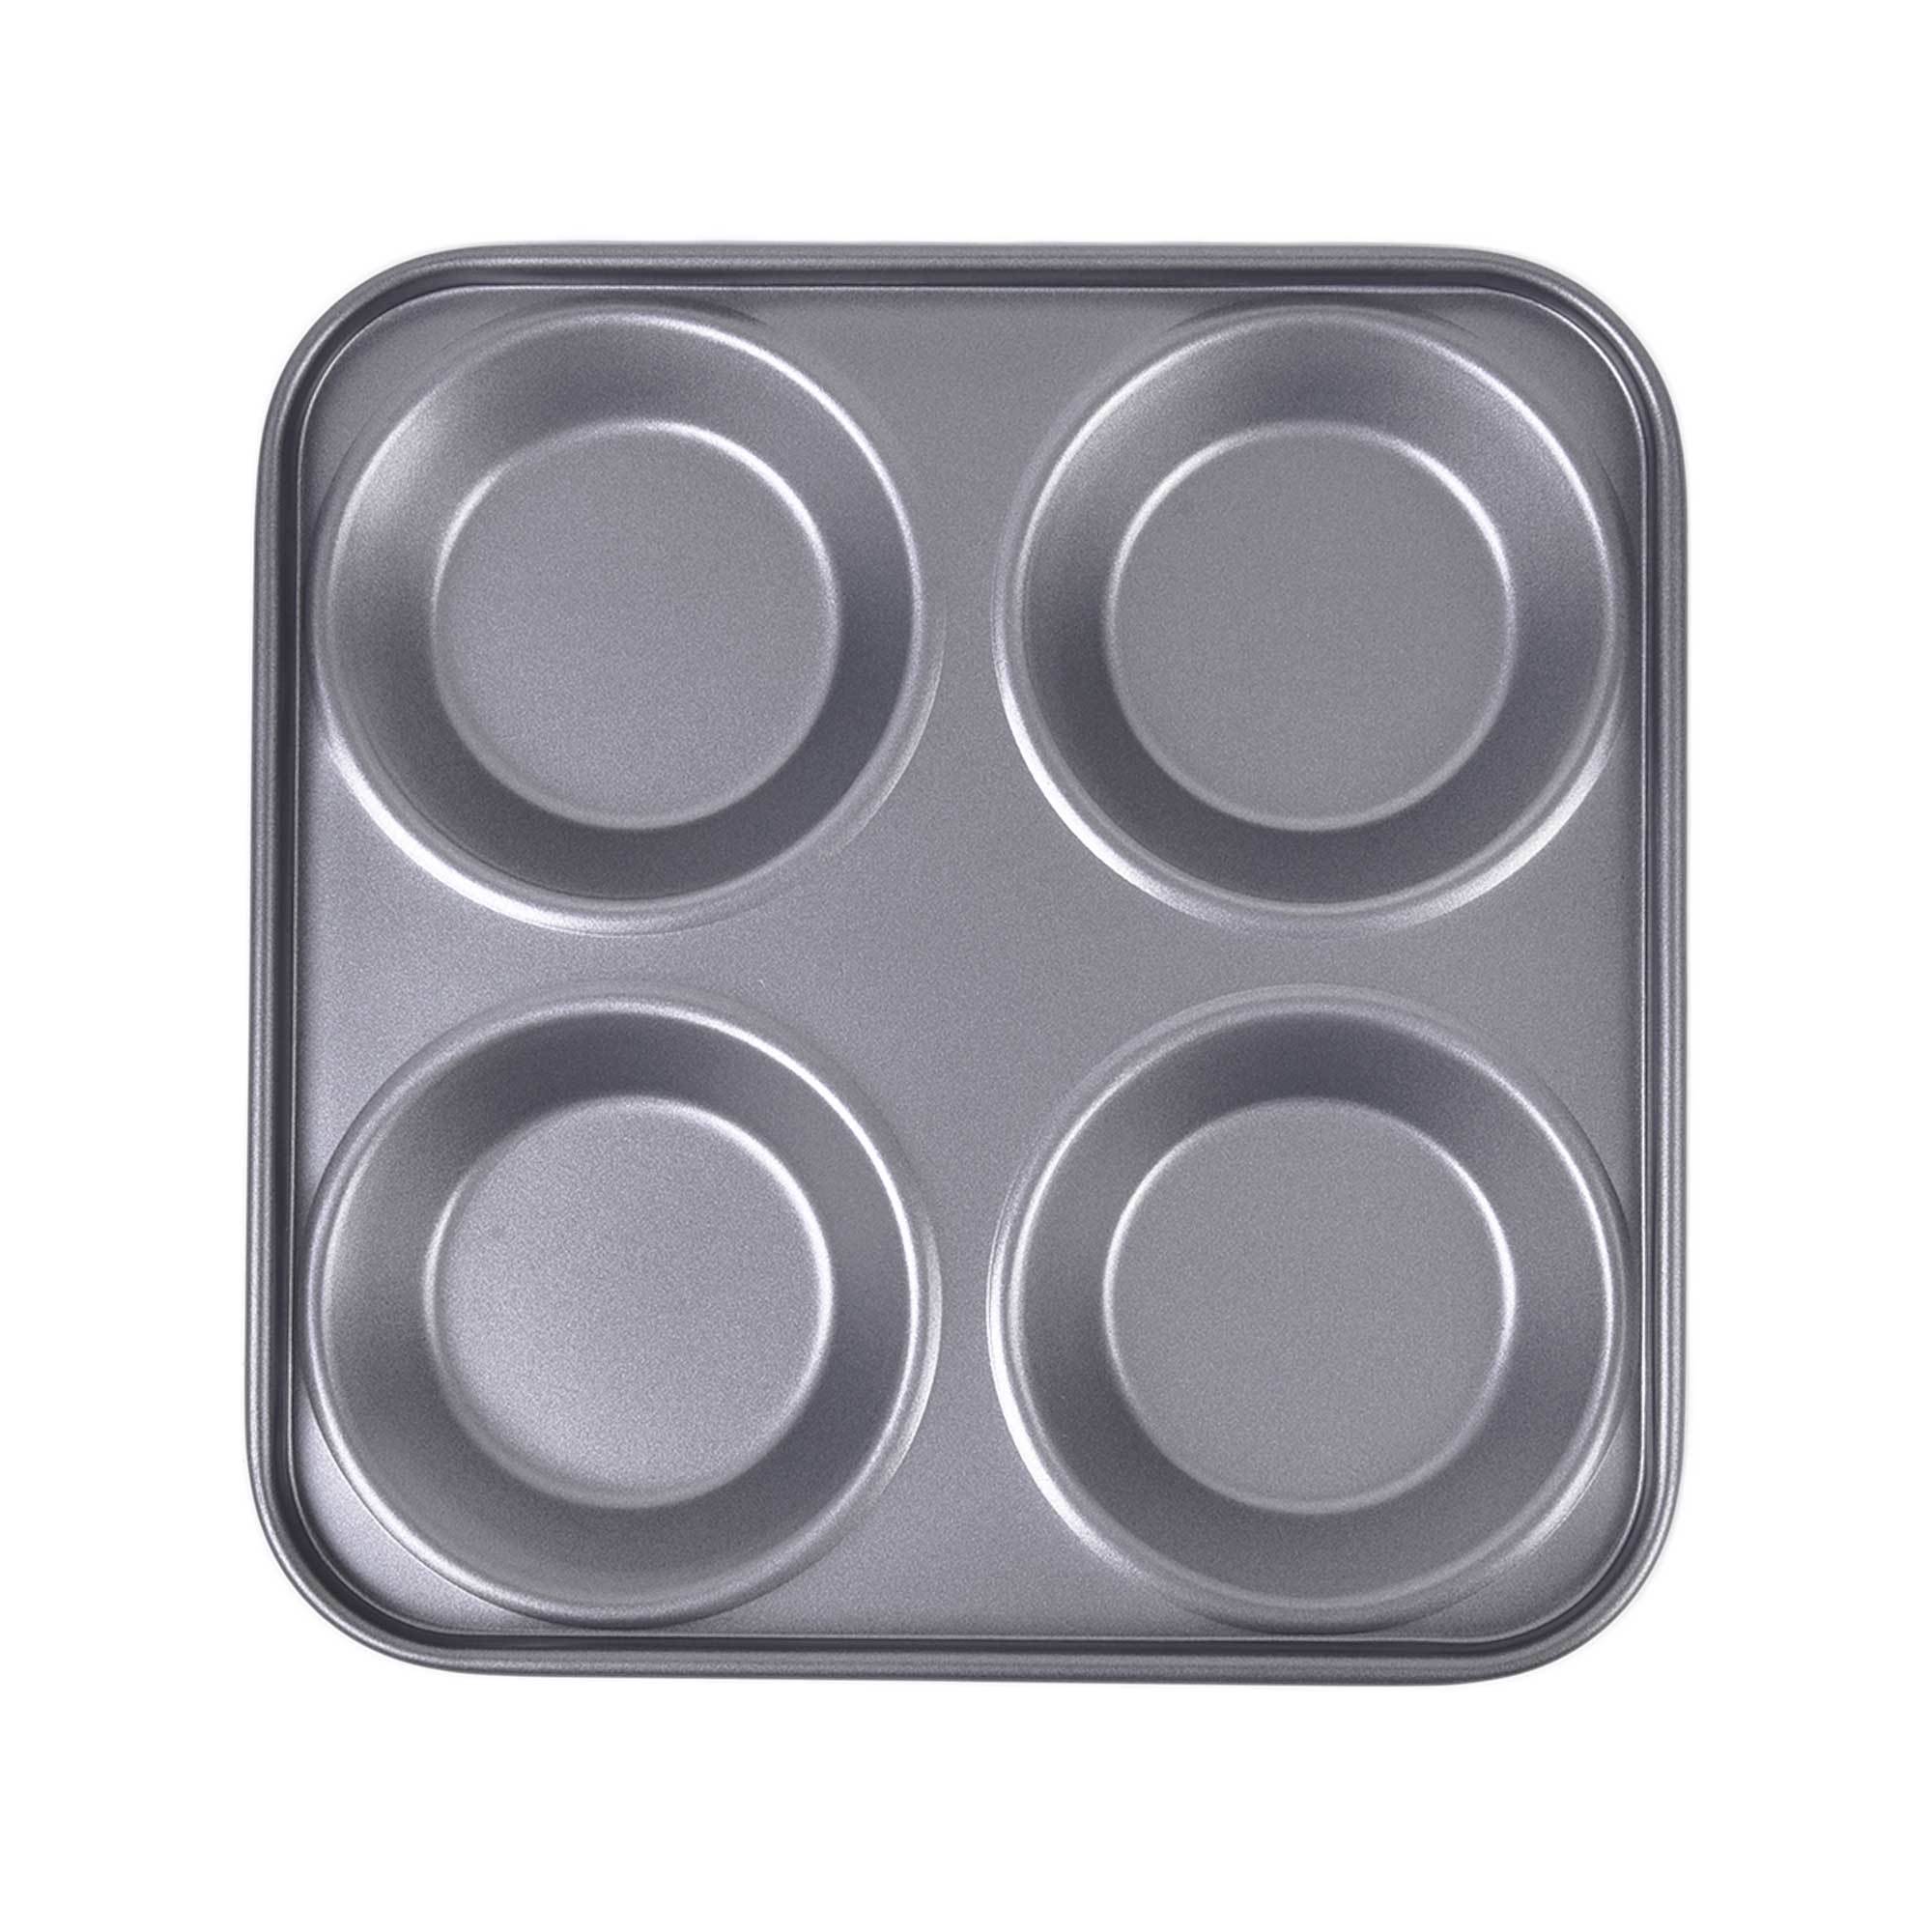 4Cup Yorkshire Pudding Pan 3231-20